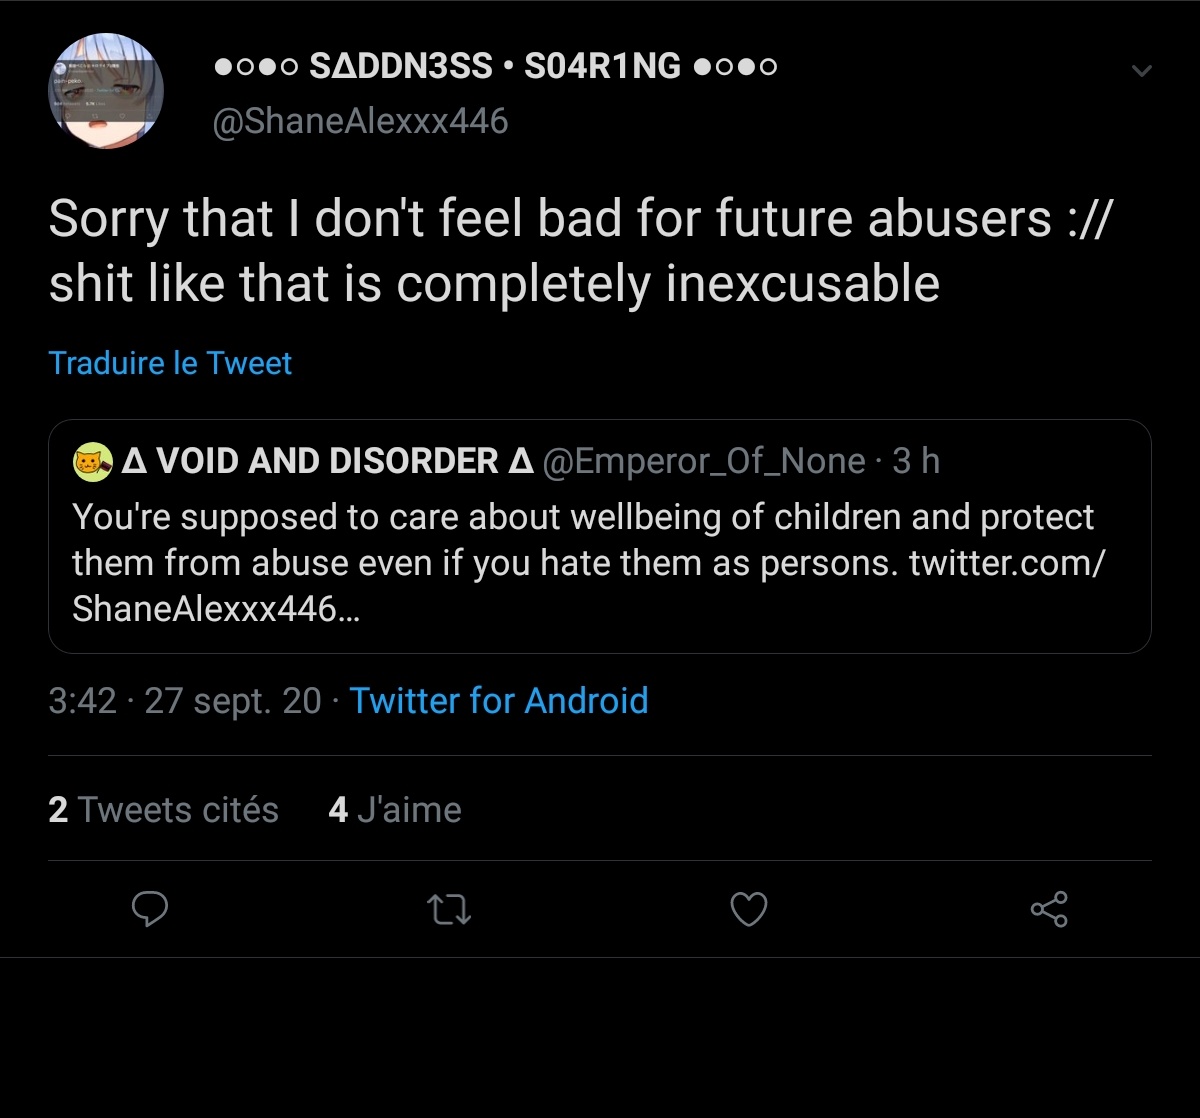 "future abusers"? Since when can a human read, or write for that matter, the future?I also love how you felt the doxxing was claimed to be done by you at any point. Something you're hiding?